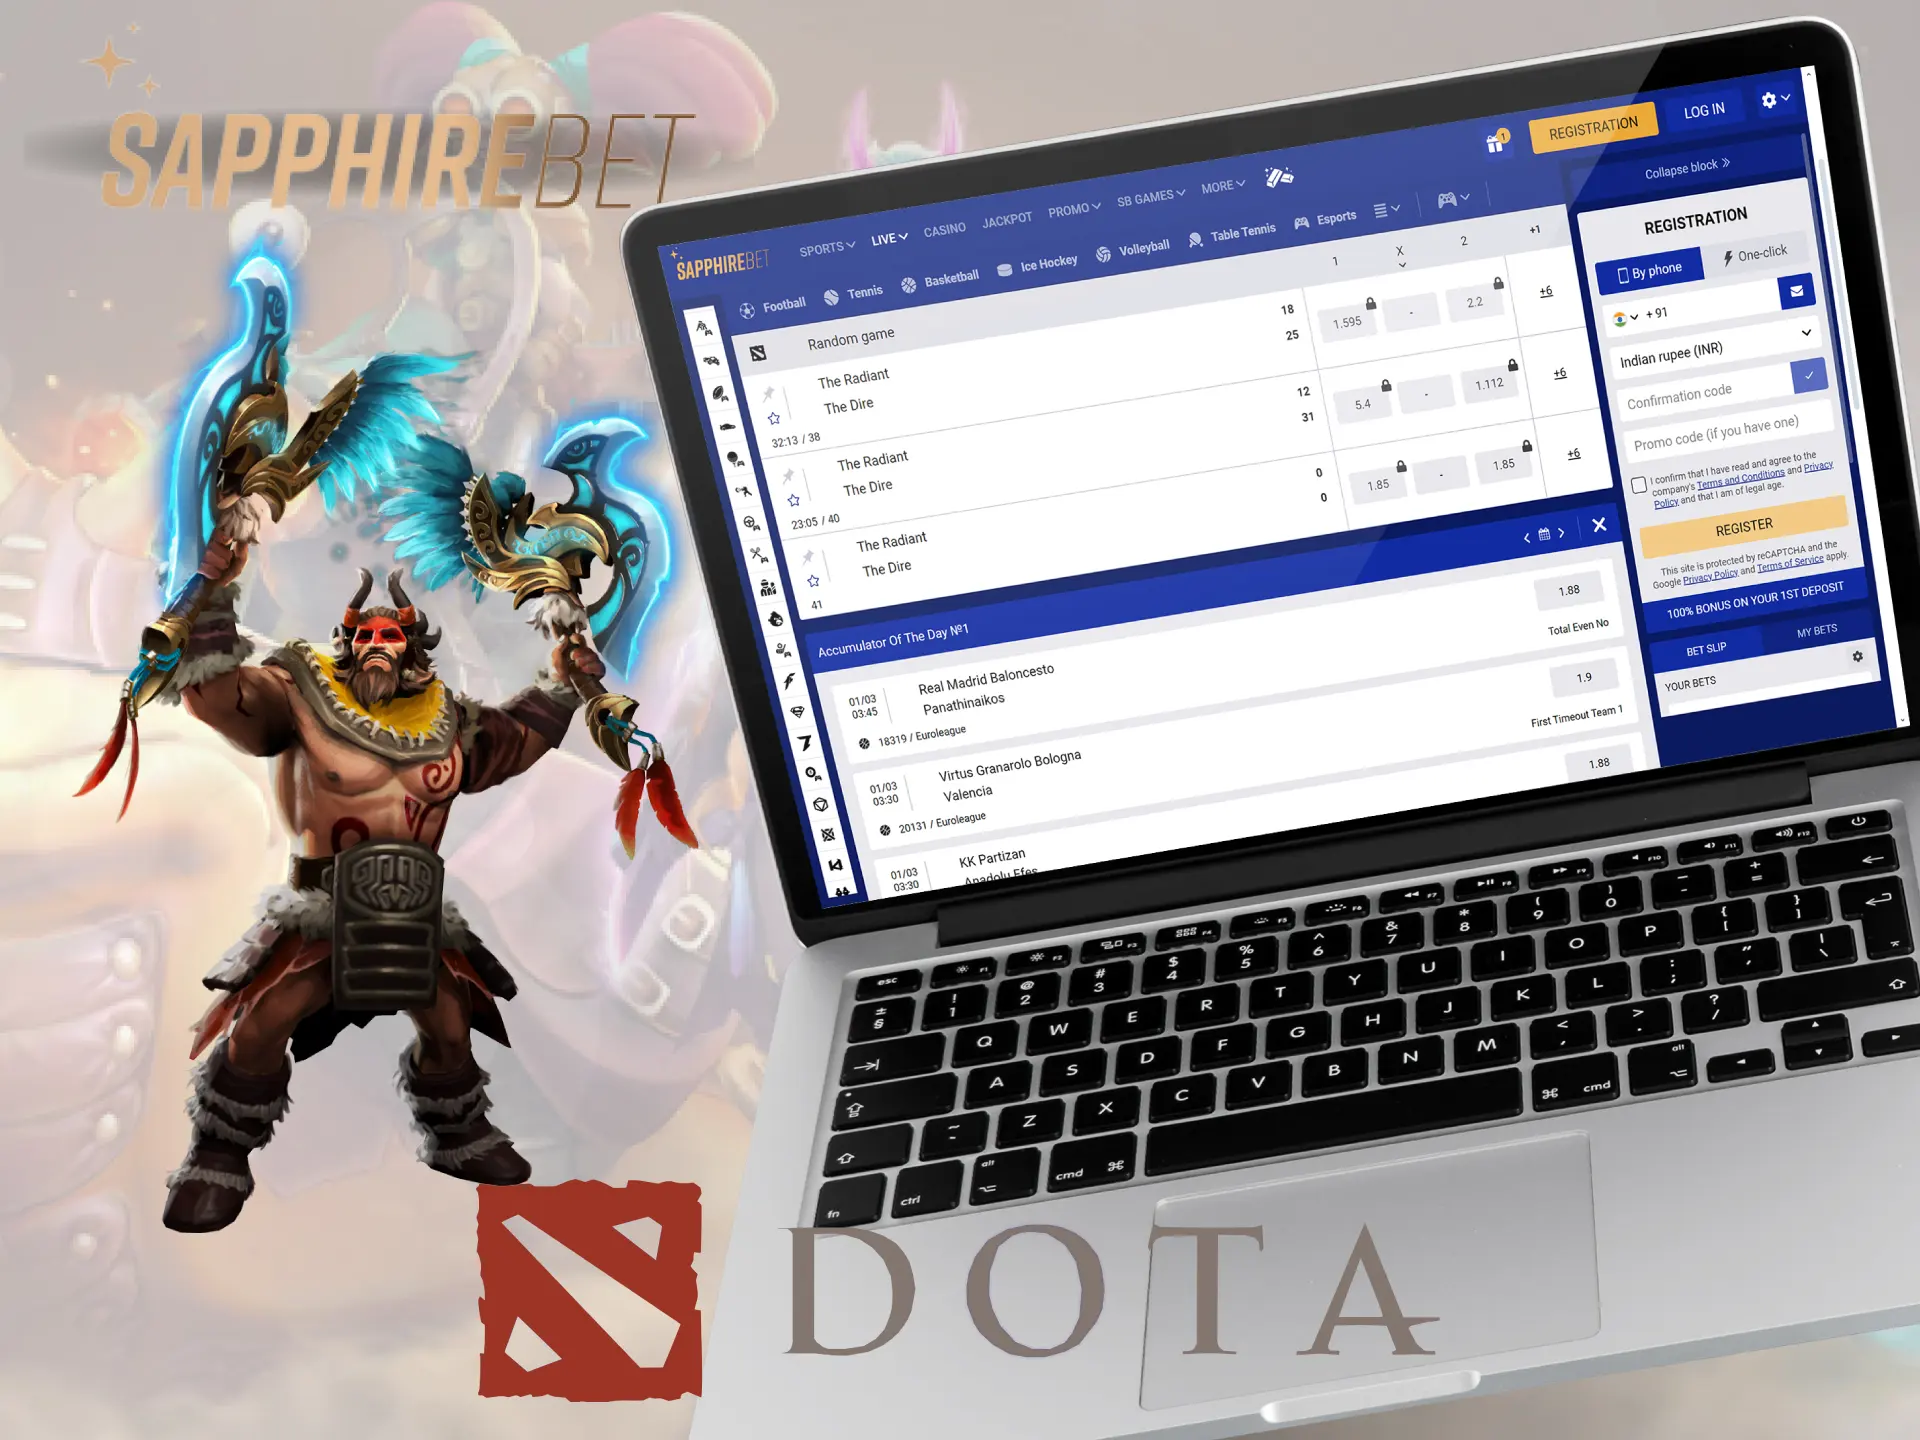 Betting on Dota 2 at SapphireBet is a favorable option for cyber sports bettors.